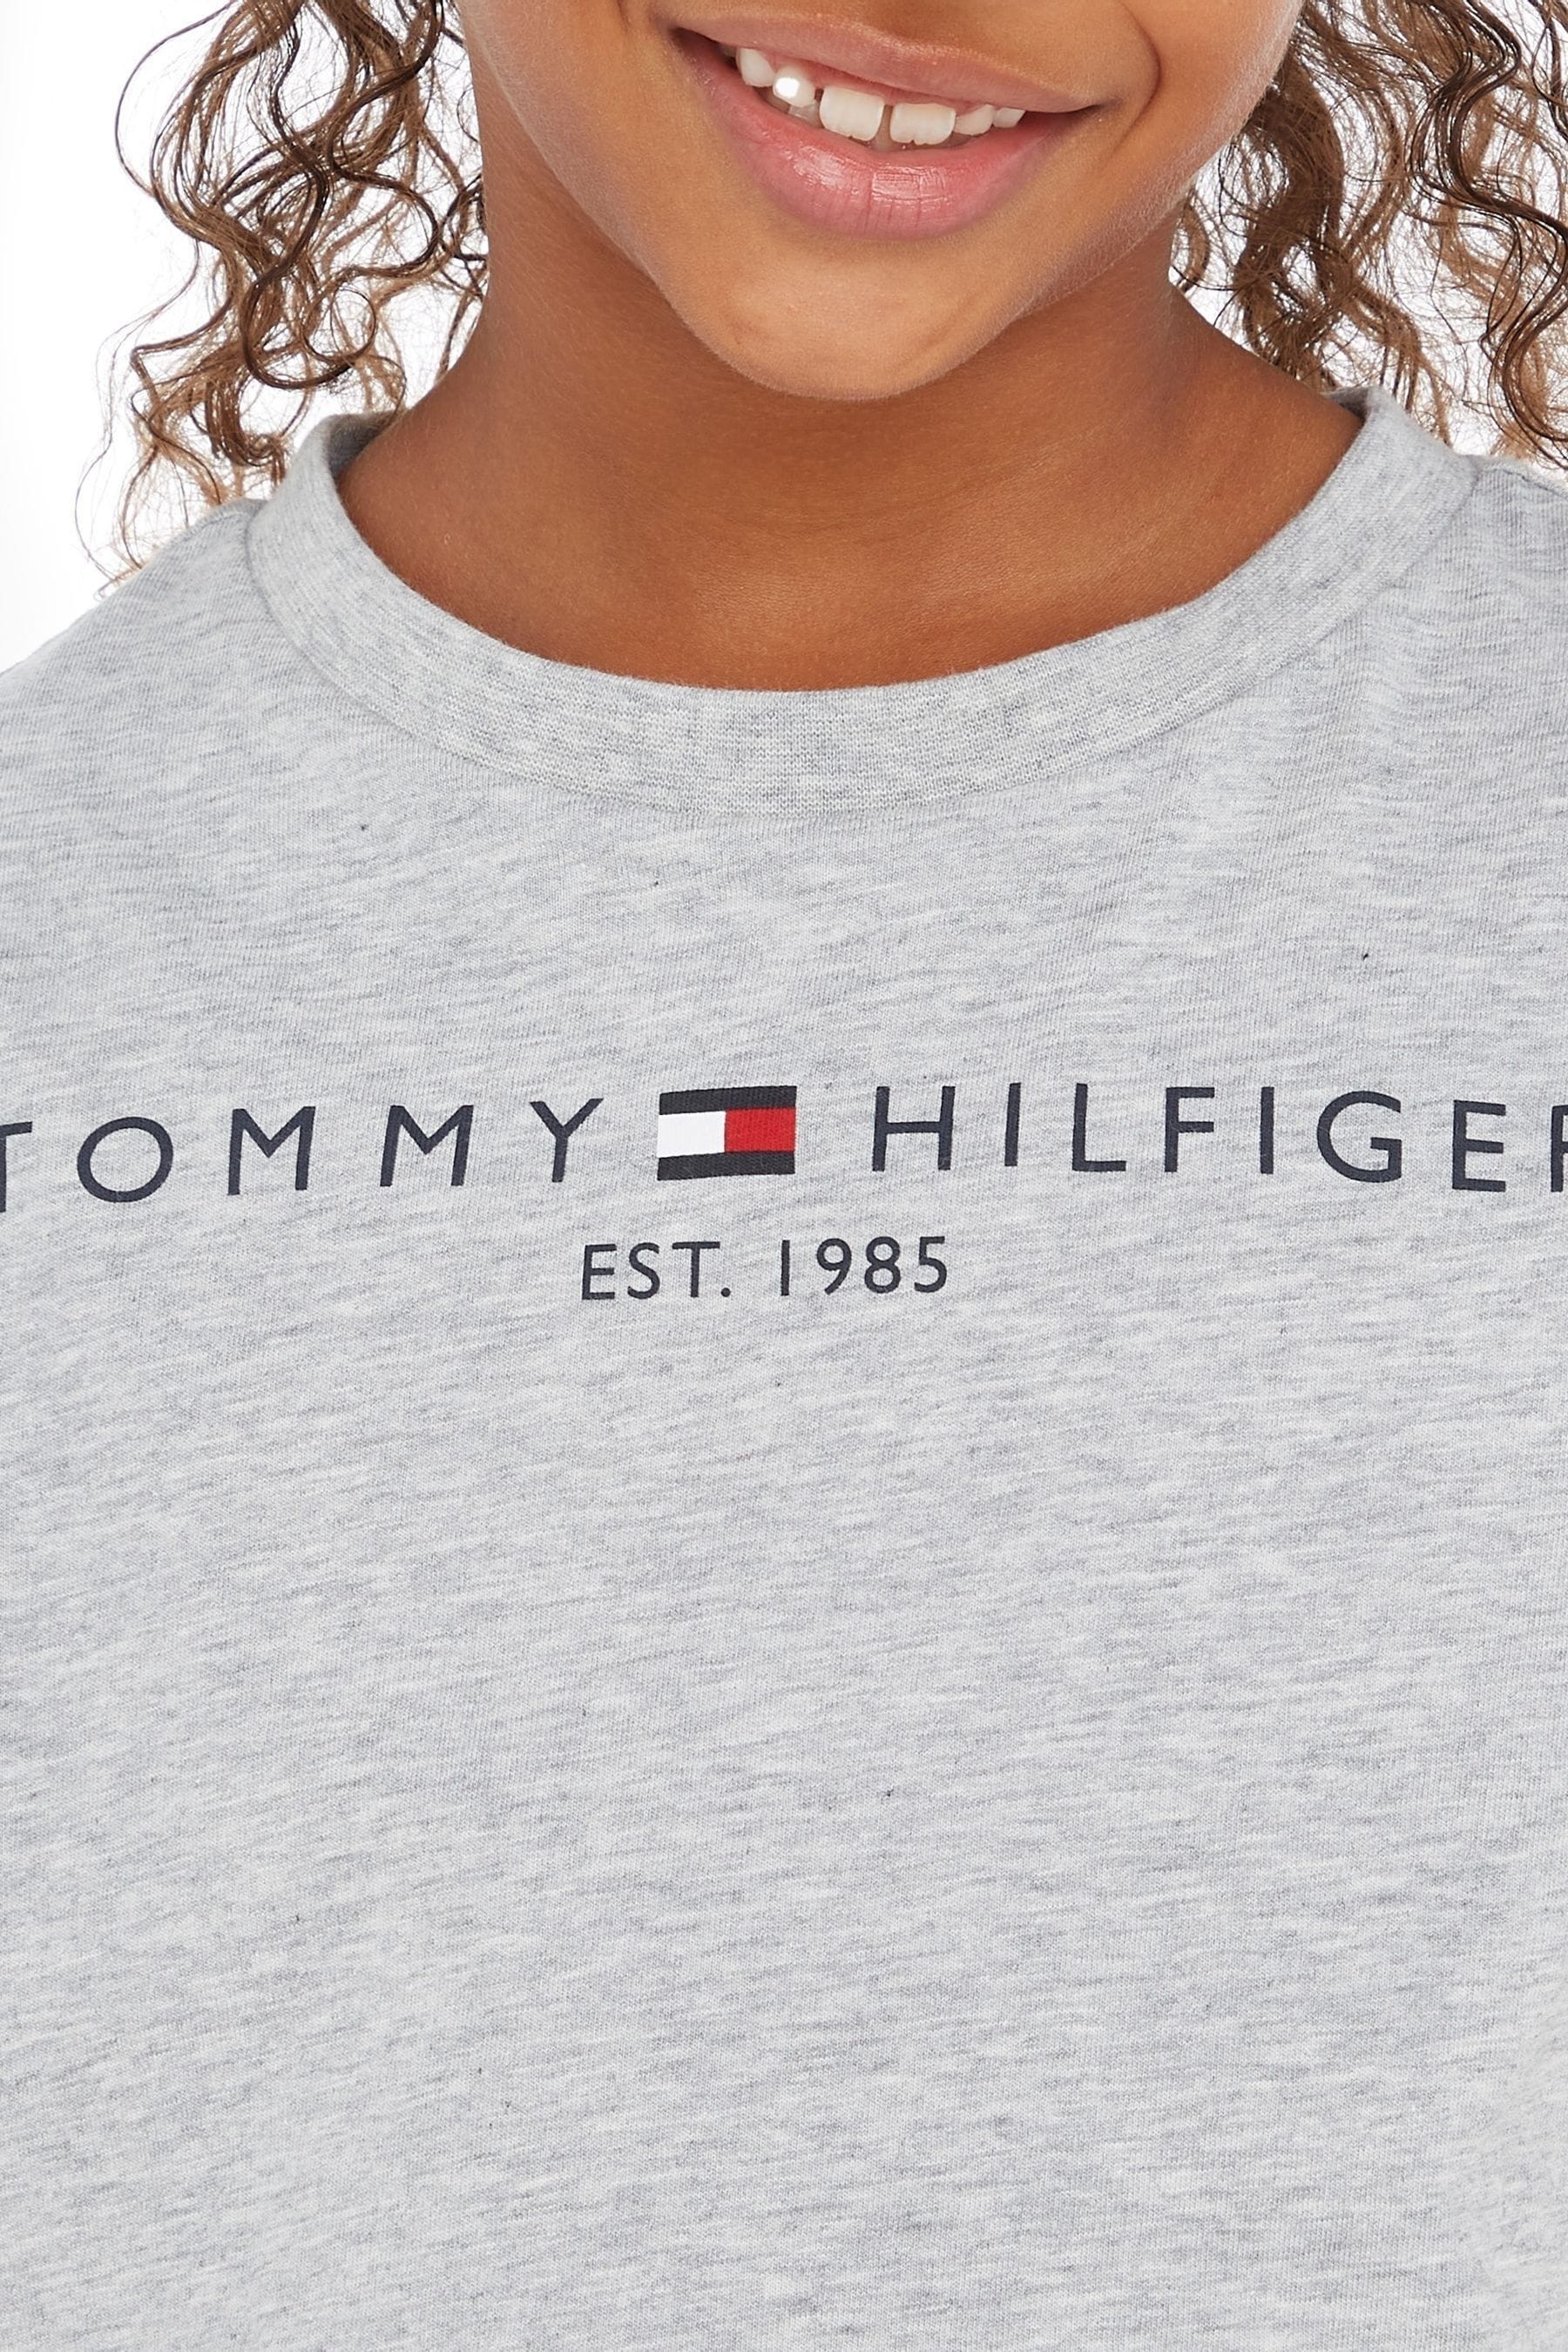 Buy Tommy Hilfiger Essential T-Shirt from the Next UK online shop